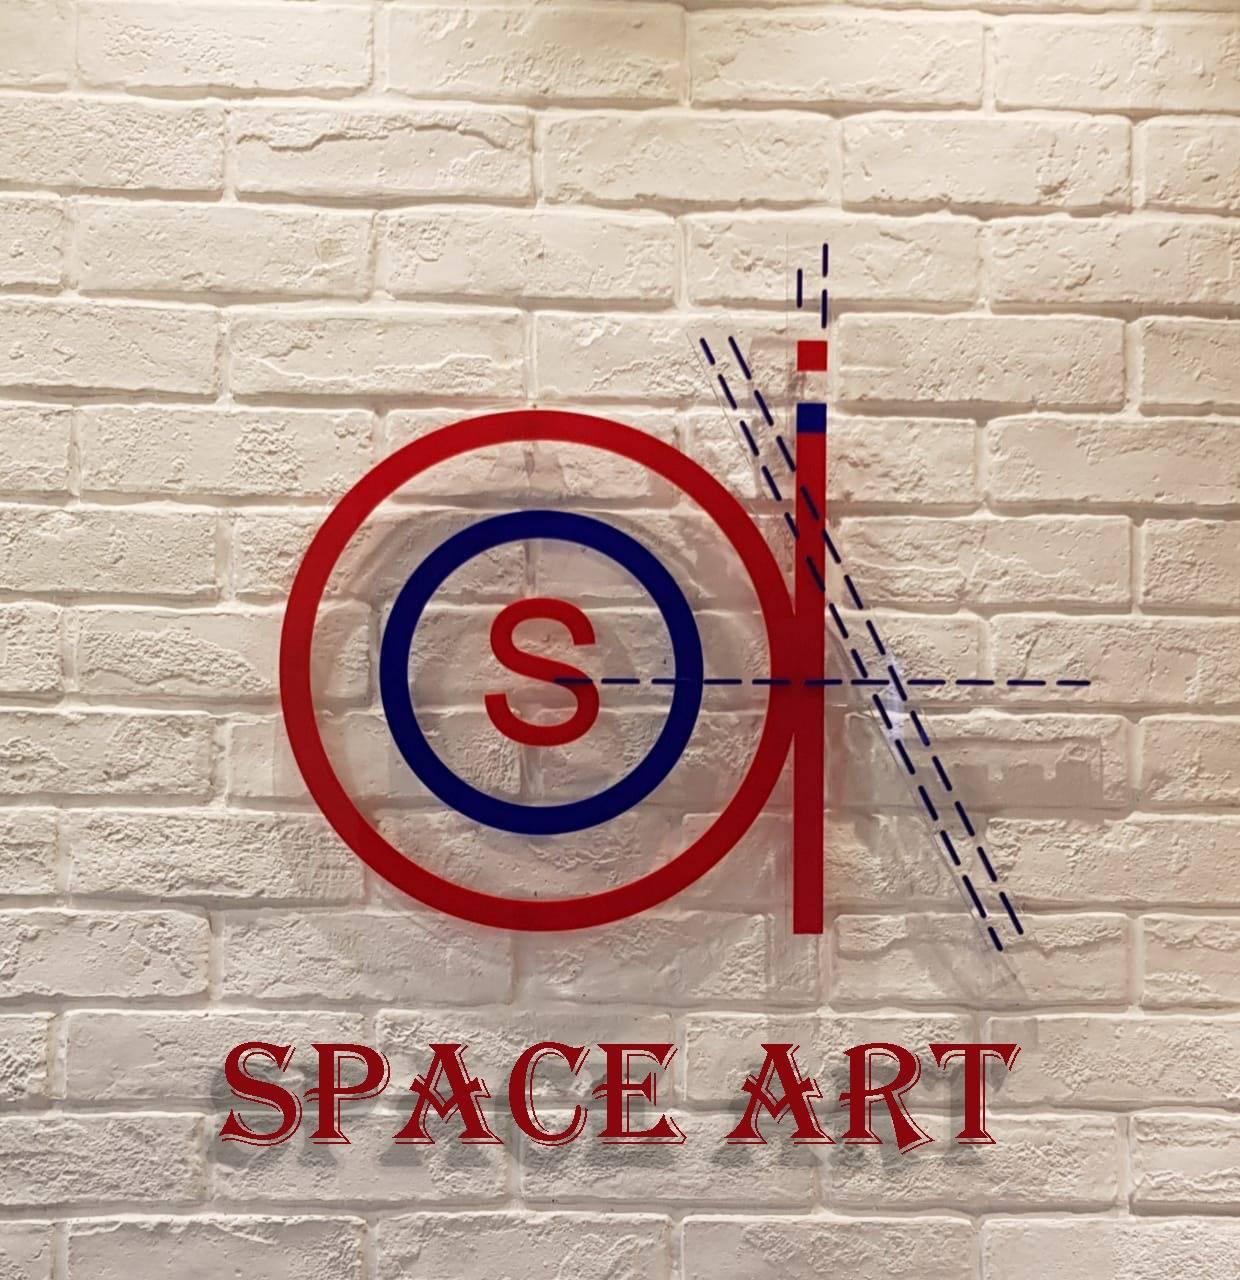 Space Art interior designers & Architects|Architect|Professional Services